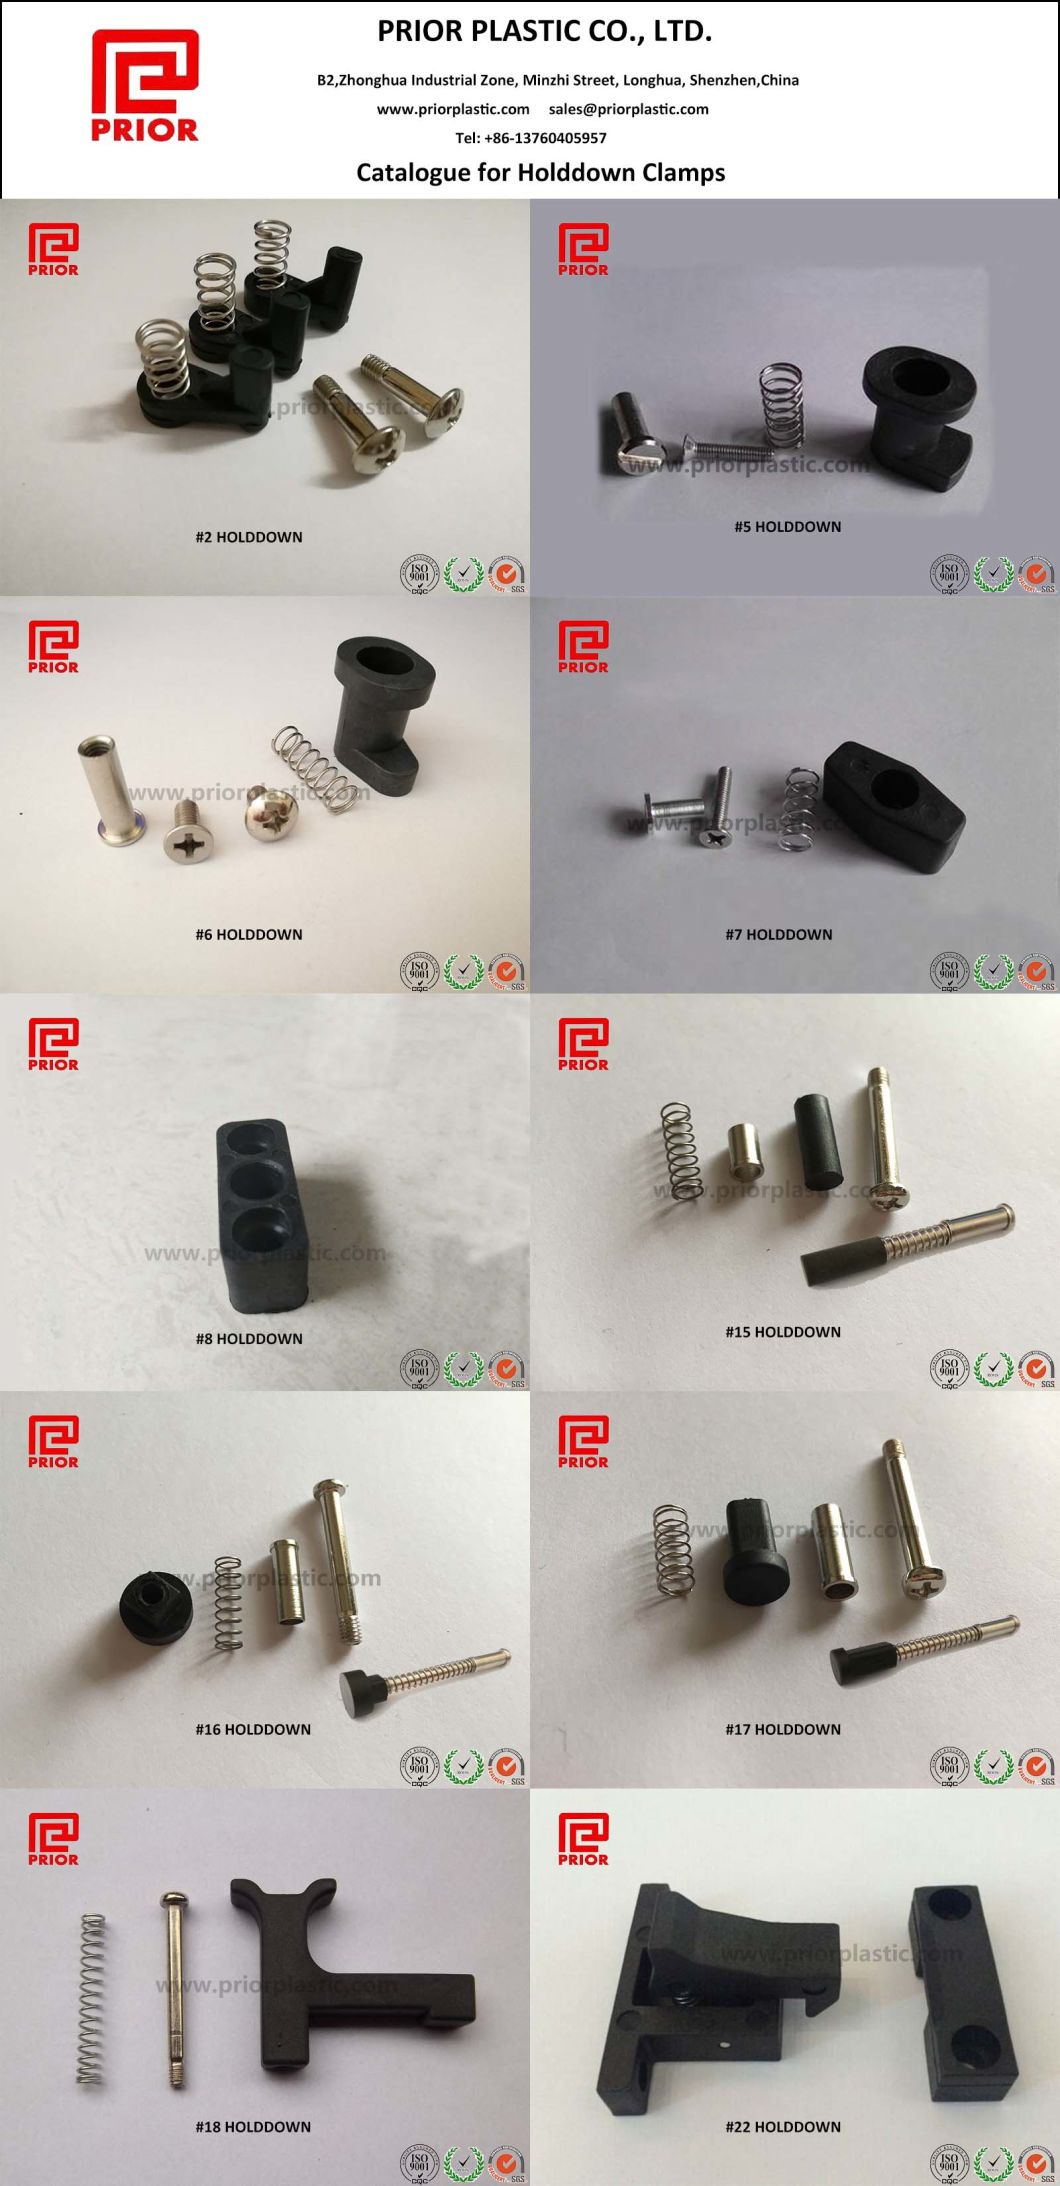 Wave Fixture Hold Down Clamps for Wholesale